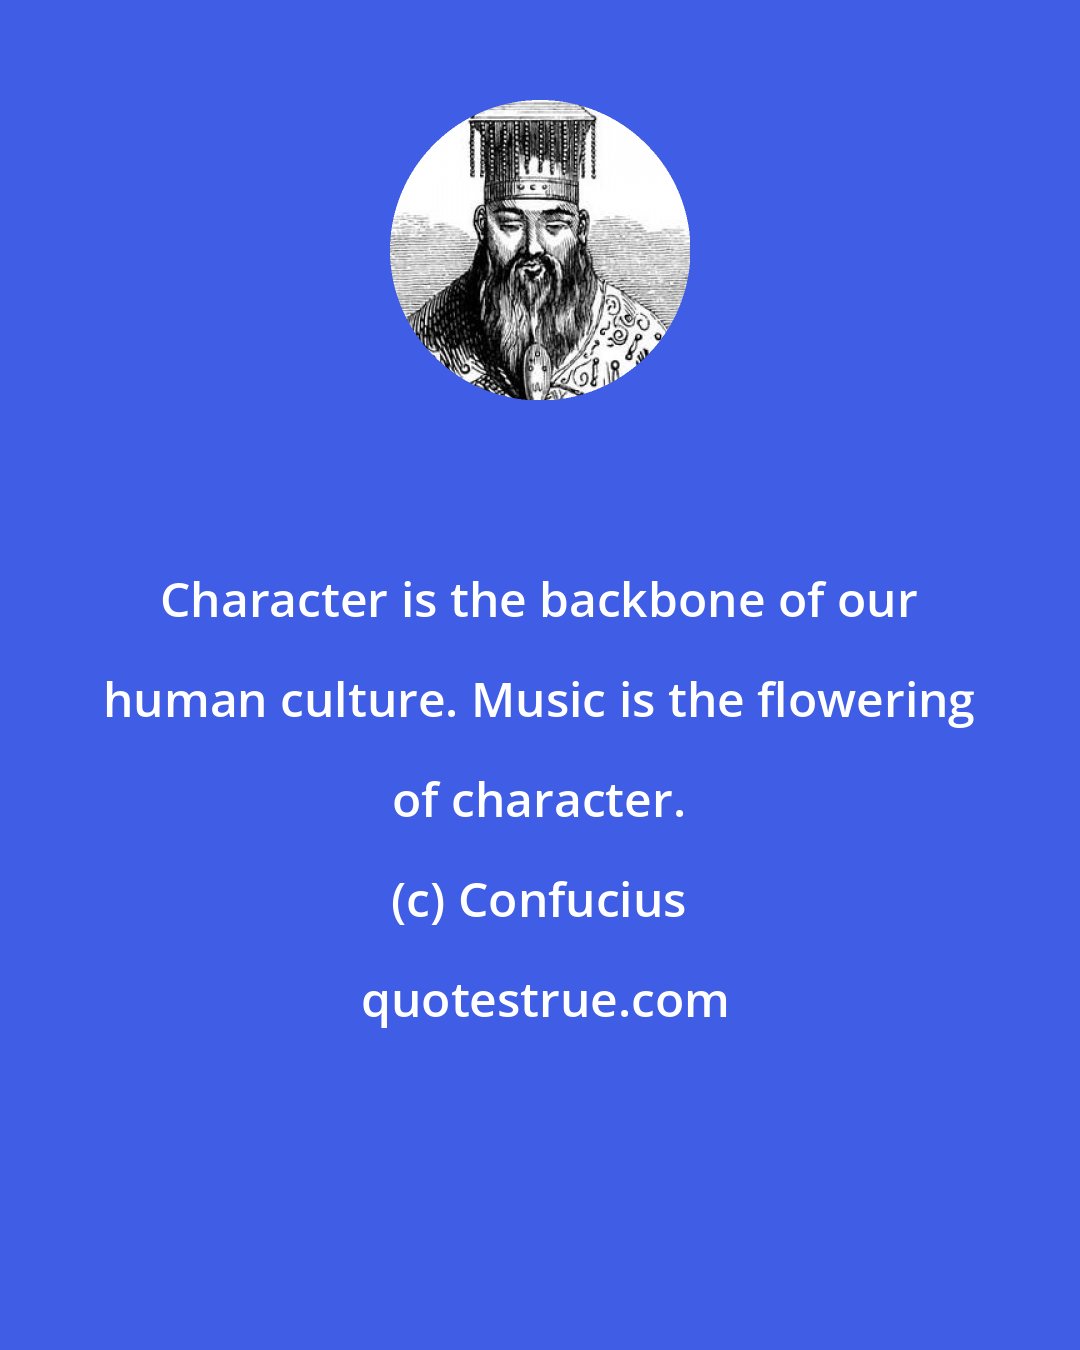 Confucius: Character is the backbone of our human culture. Music is the flowering of character.